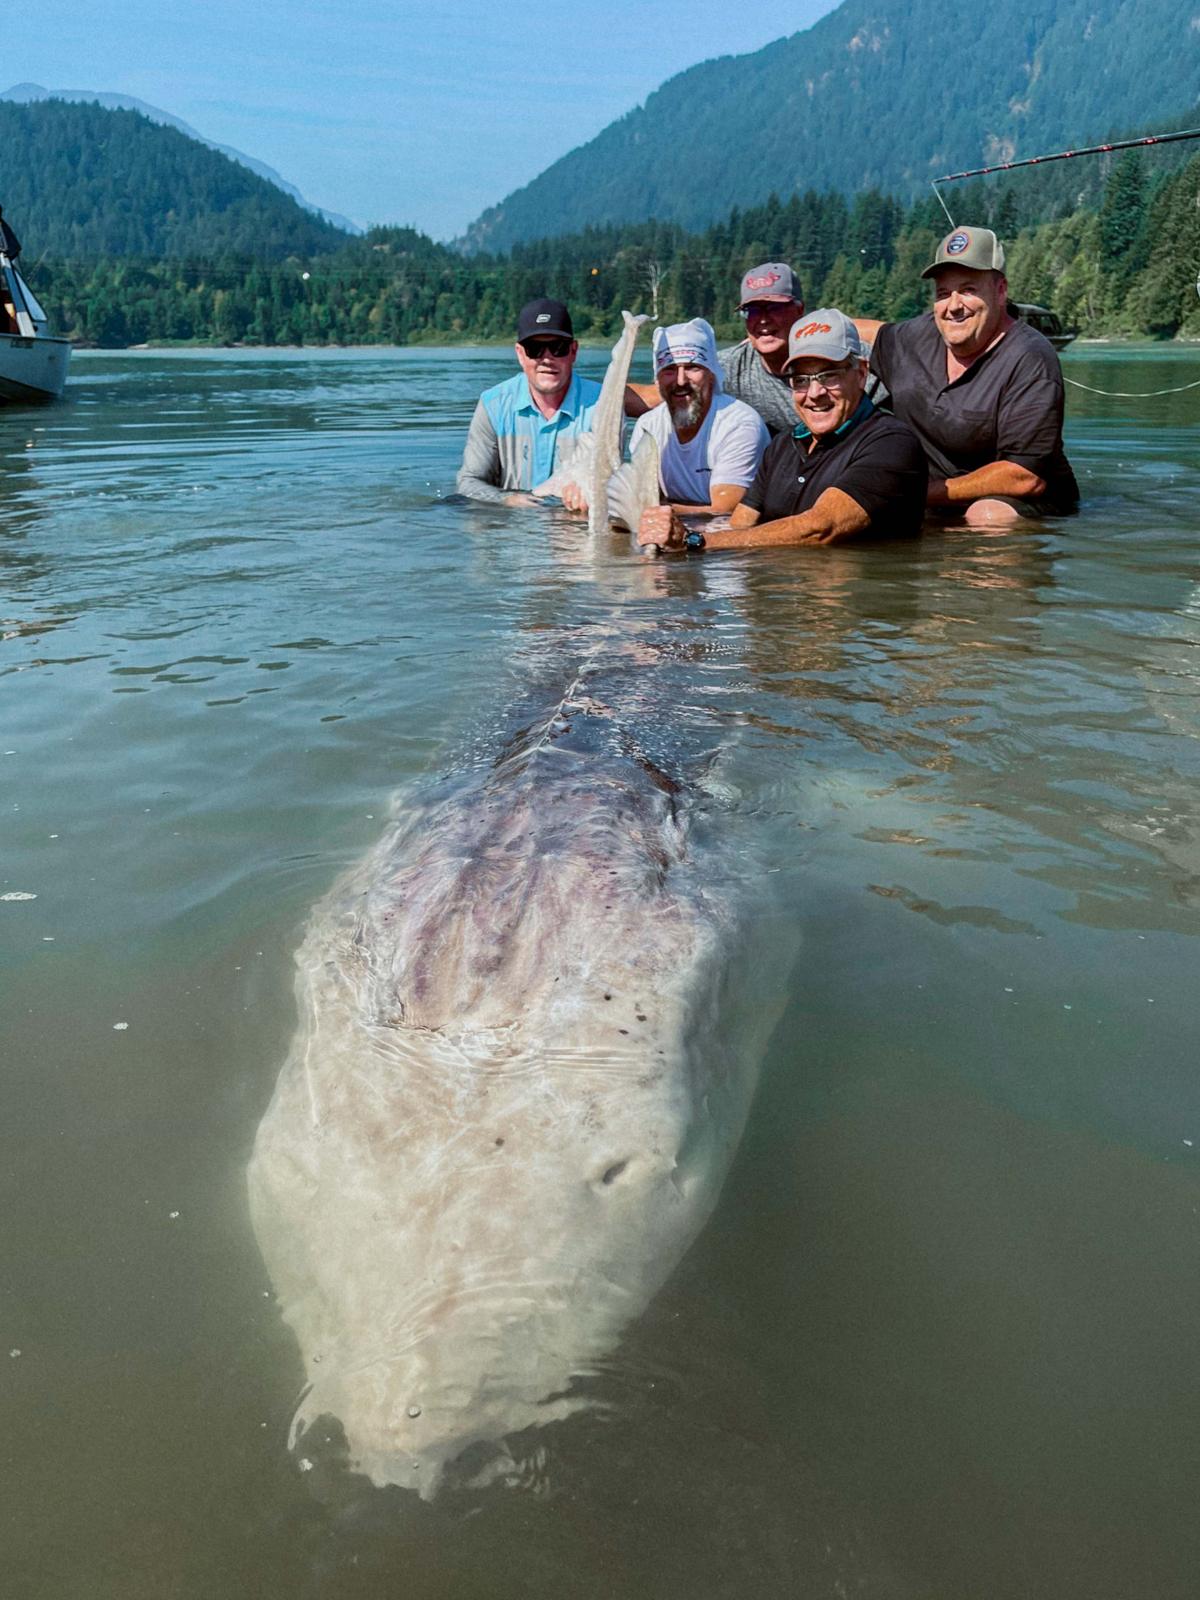 Kevin Estrada (L) and company pose with the monster sturgeon in the Fraser River Aug. 15. (Courtesy of <a href="http://www.sturgeonslayers.com/">Sturgeon Slayers</a>)